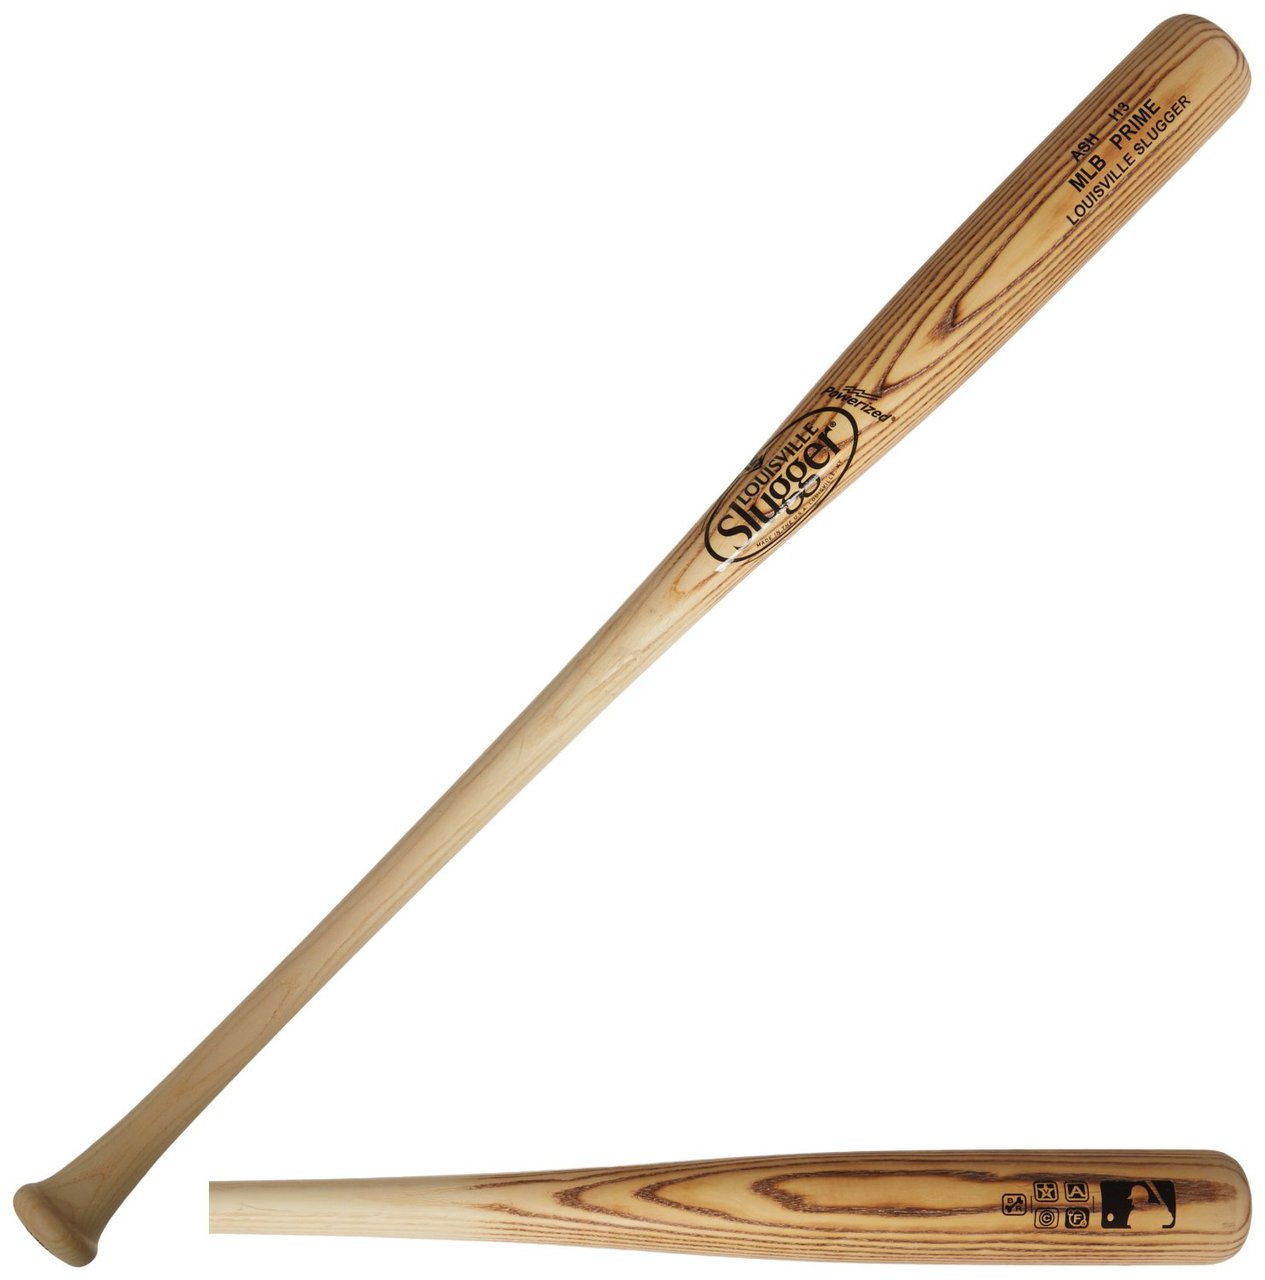 louisville-slugger-wbcamlb-fg-mlb-authentic-cut-ash-heavy-flame-32-wood-baseball-bat WBCAMLB-FG32 Louisville 044277126001 Pound for pound Ash is the strongest timber available. Ash tends